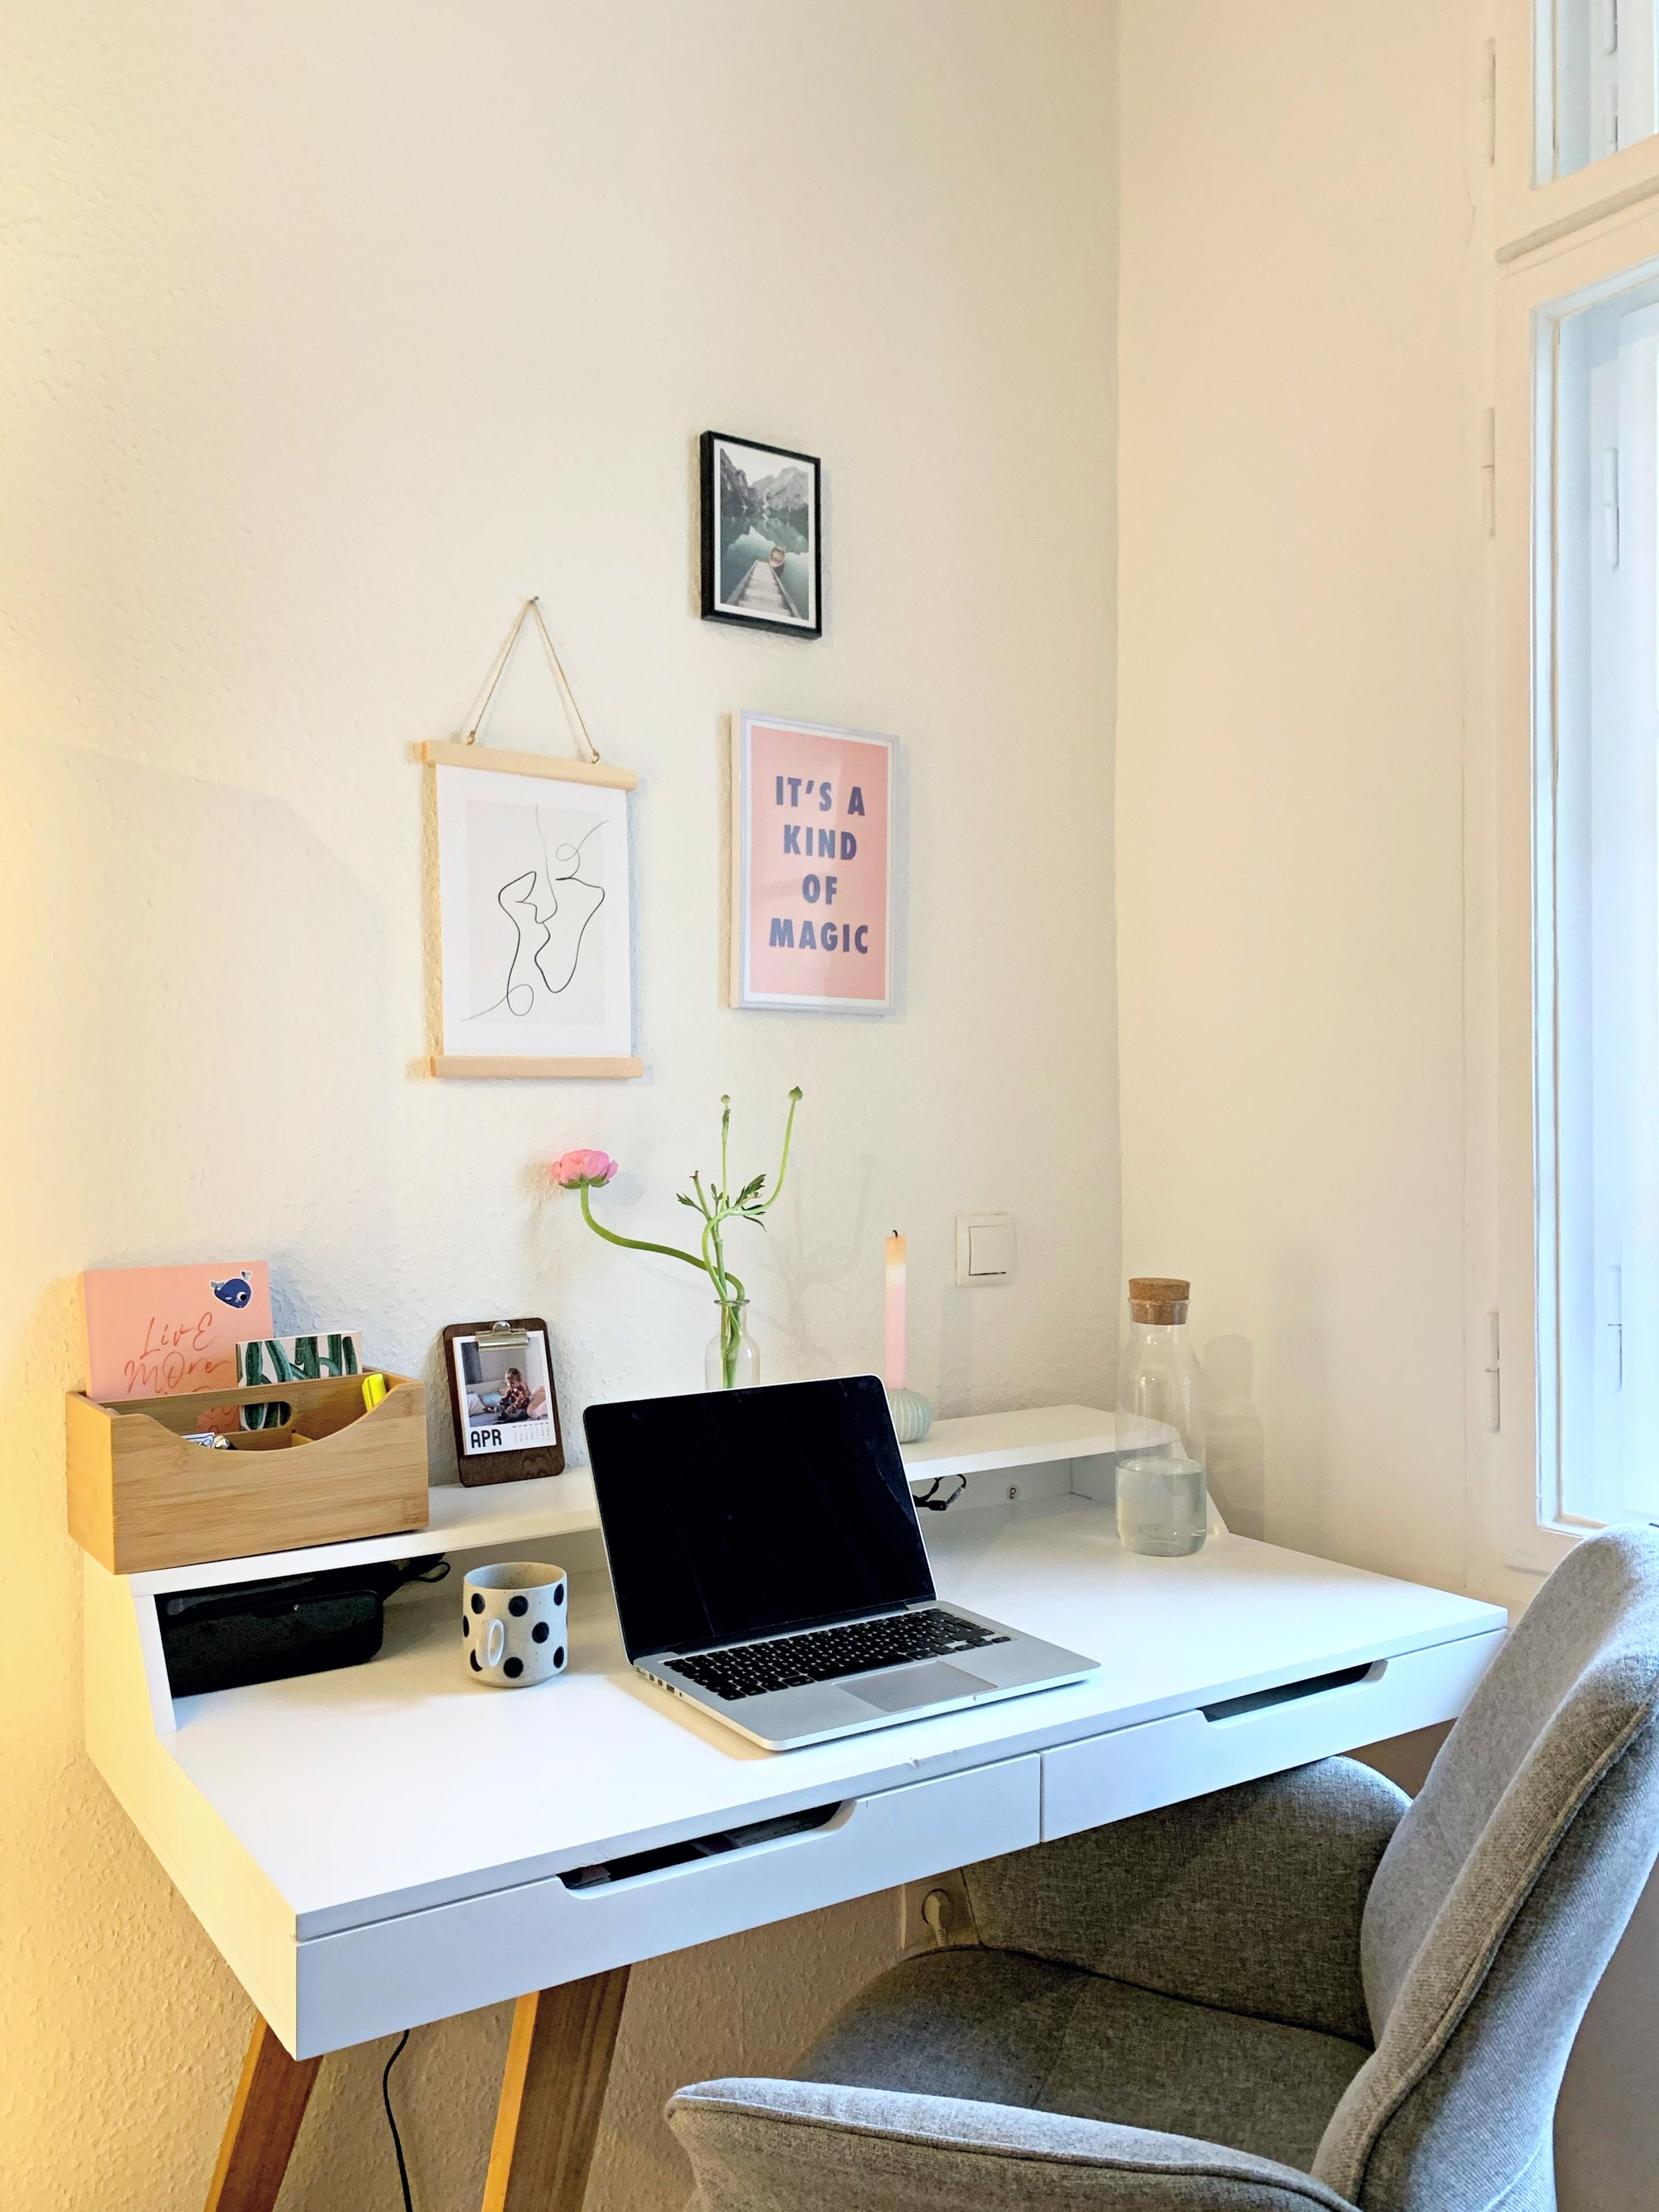 Home Office makeover #homeoffice #workspace #art